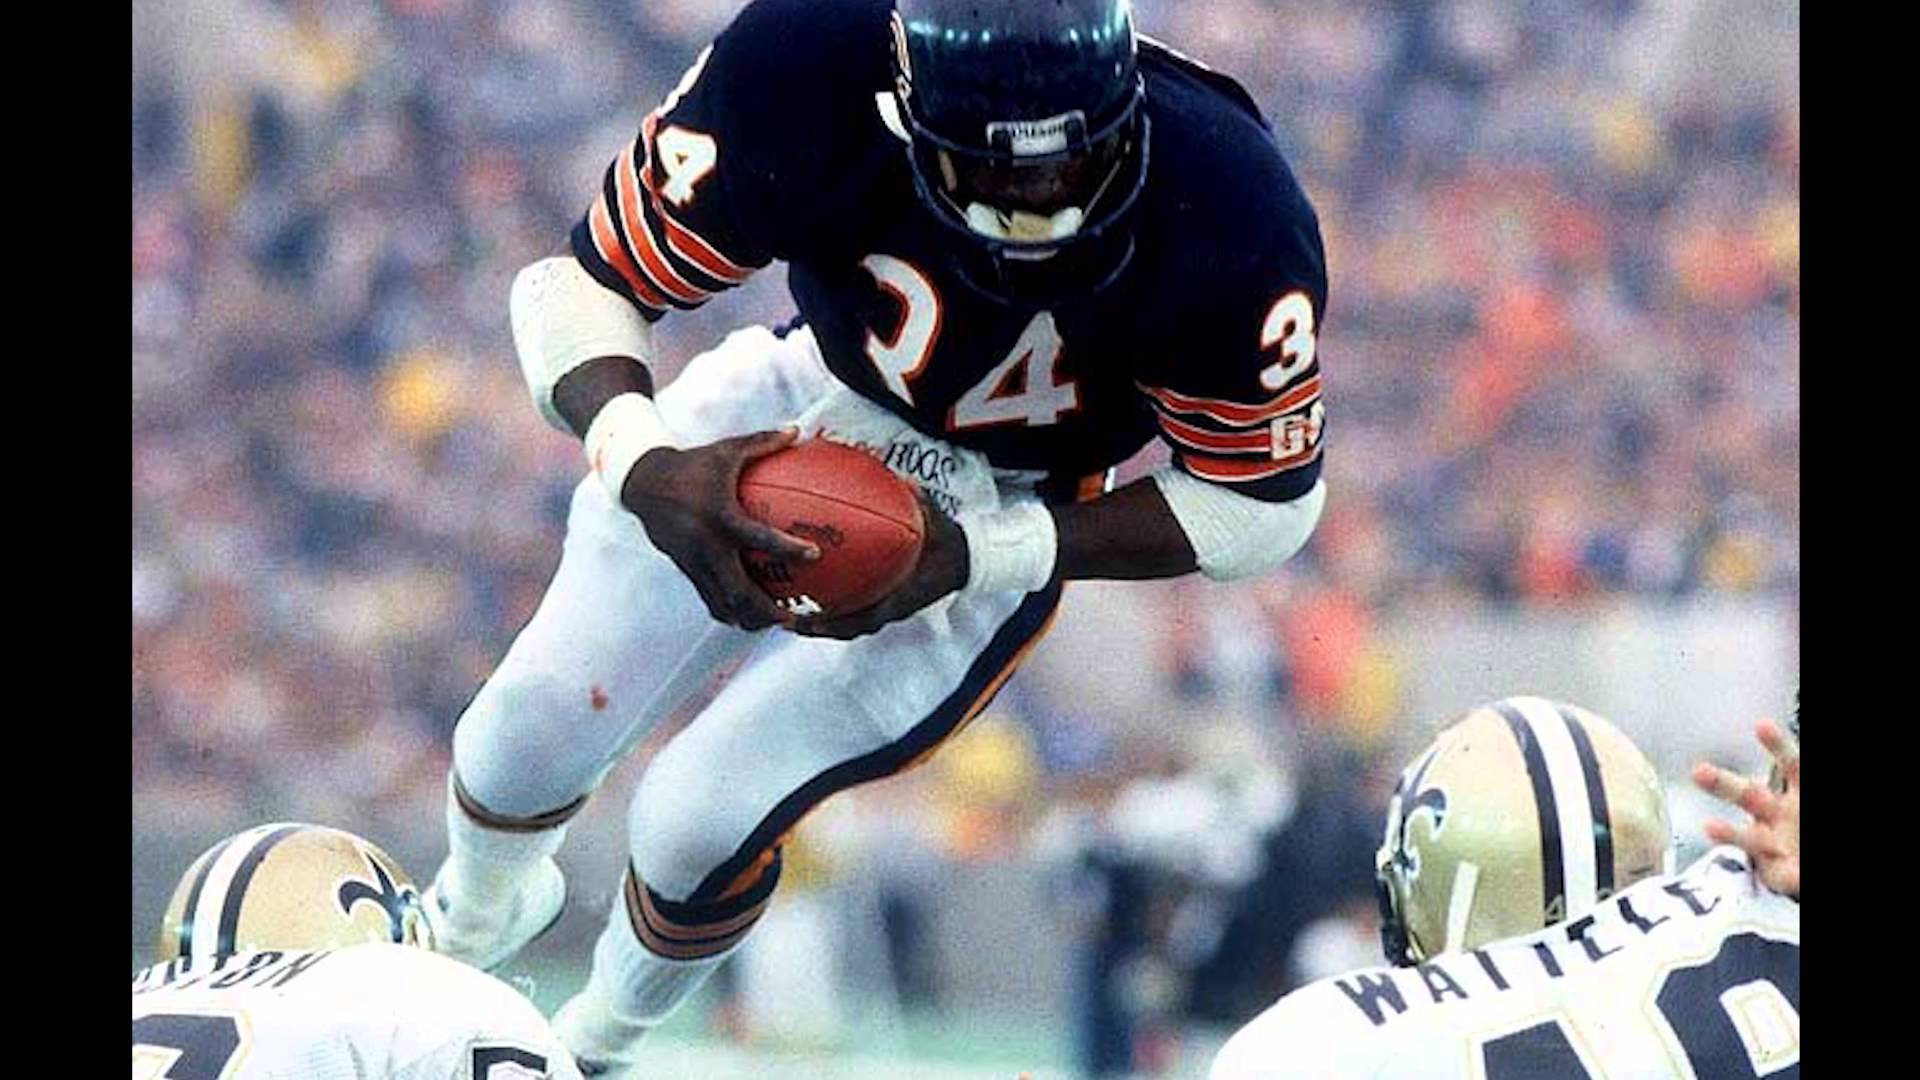 Walter Payton screenshots images and pictures  Giant Bomb